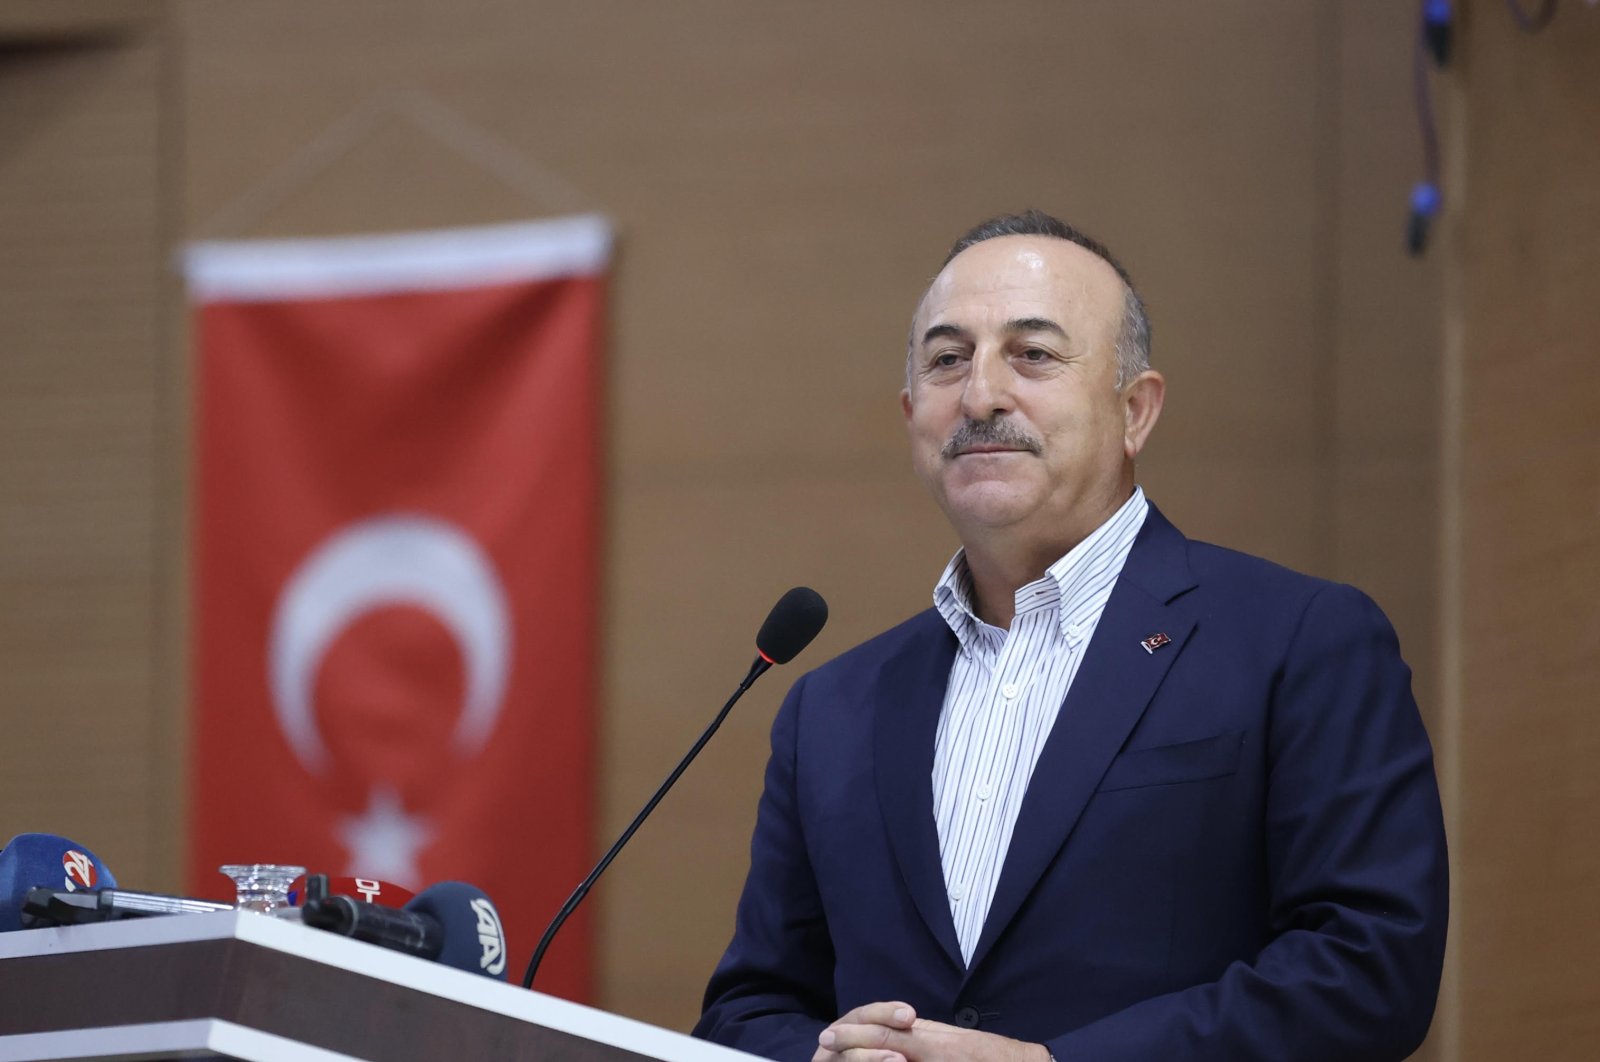 Foreign Minister Mevlüt Çavuşoğlu speaks at the Entrepreneurial and Humanitarian Turkish Foreign Policy Conference in Bingöl province, eastern Turkey, June 15, 2022. (AA Photo)